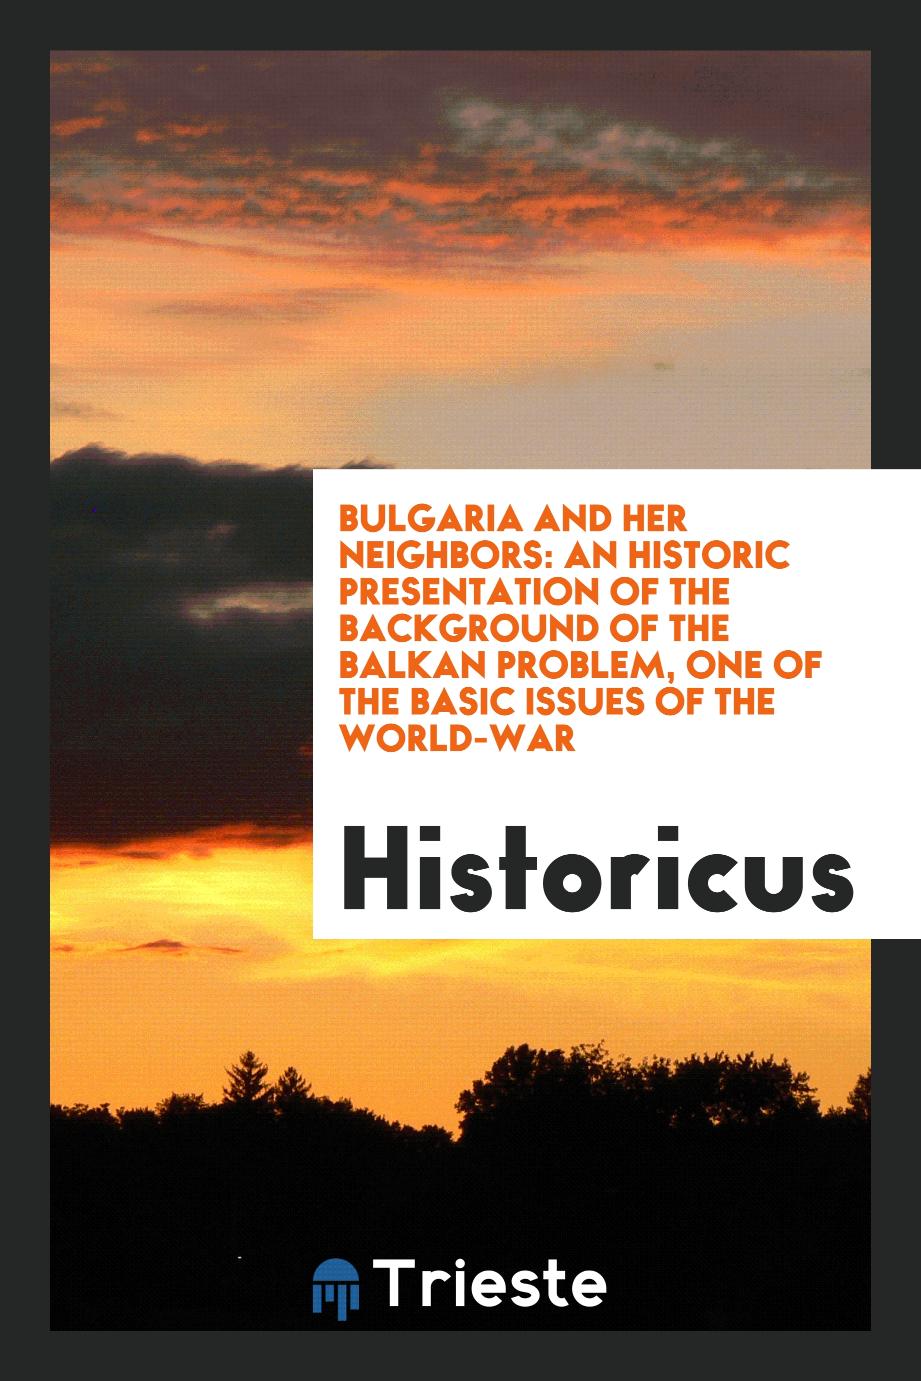 Bulgaria and Her Neighbors: An Historic Presentation of the Background of the Balkan Problem, One of the Basic Issues of the World-War